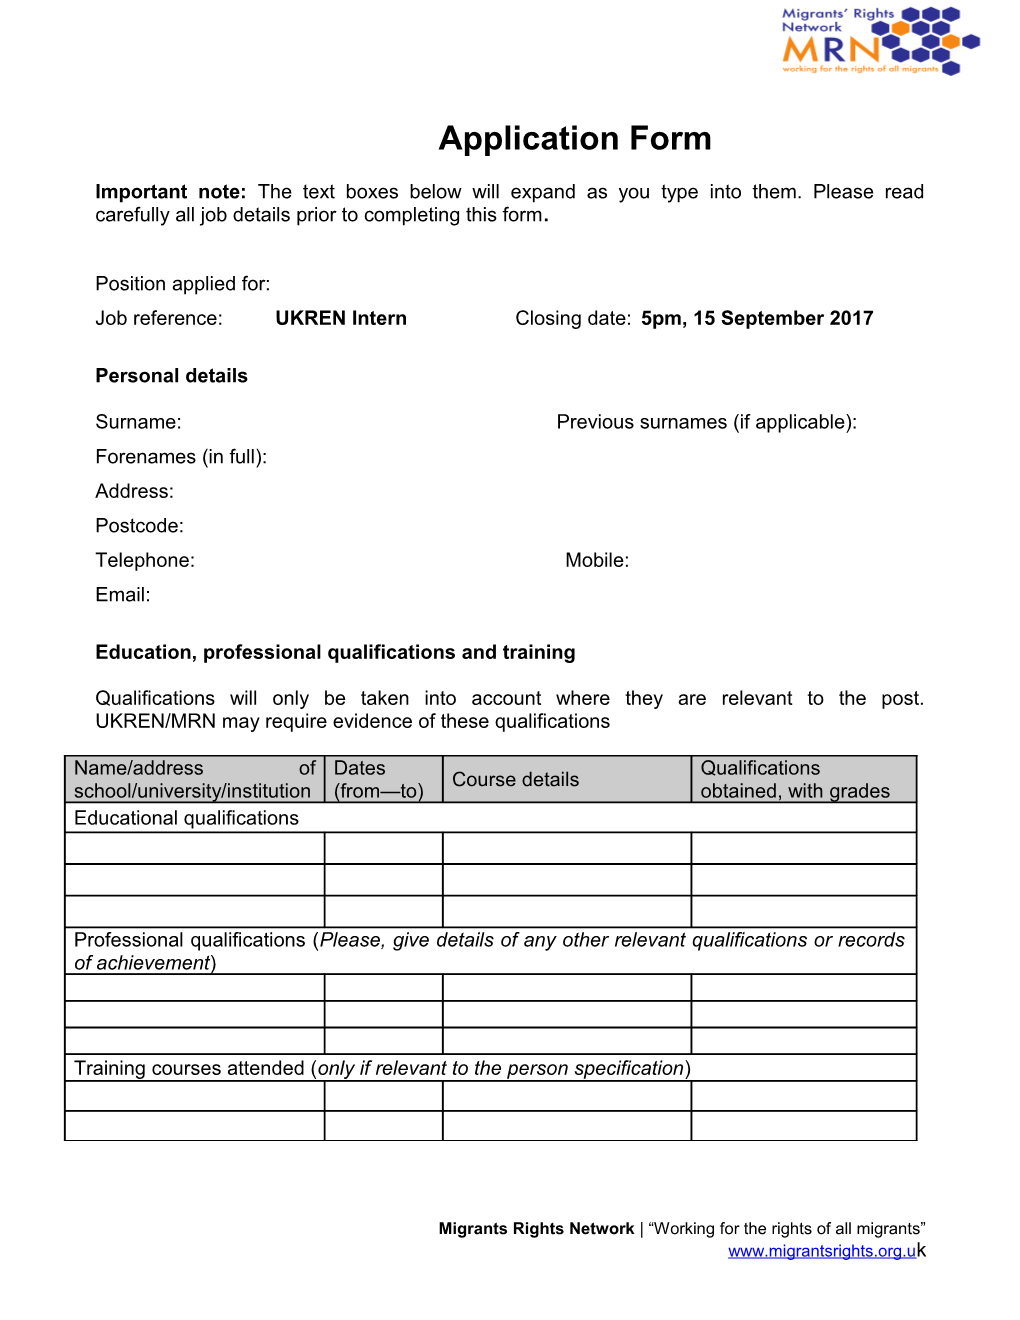 Application Form s92